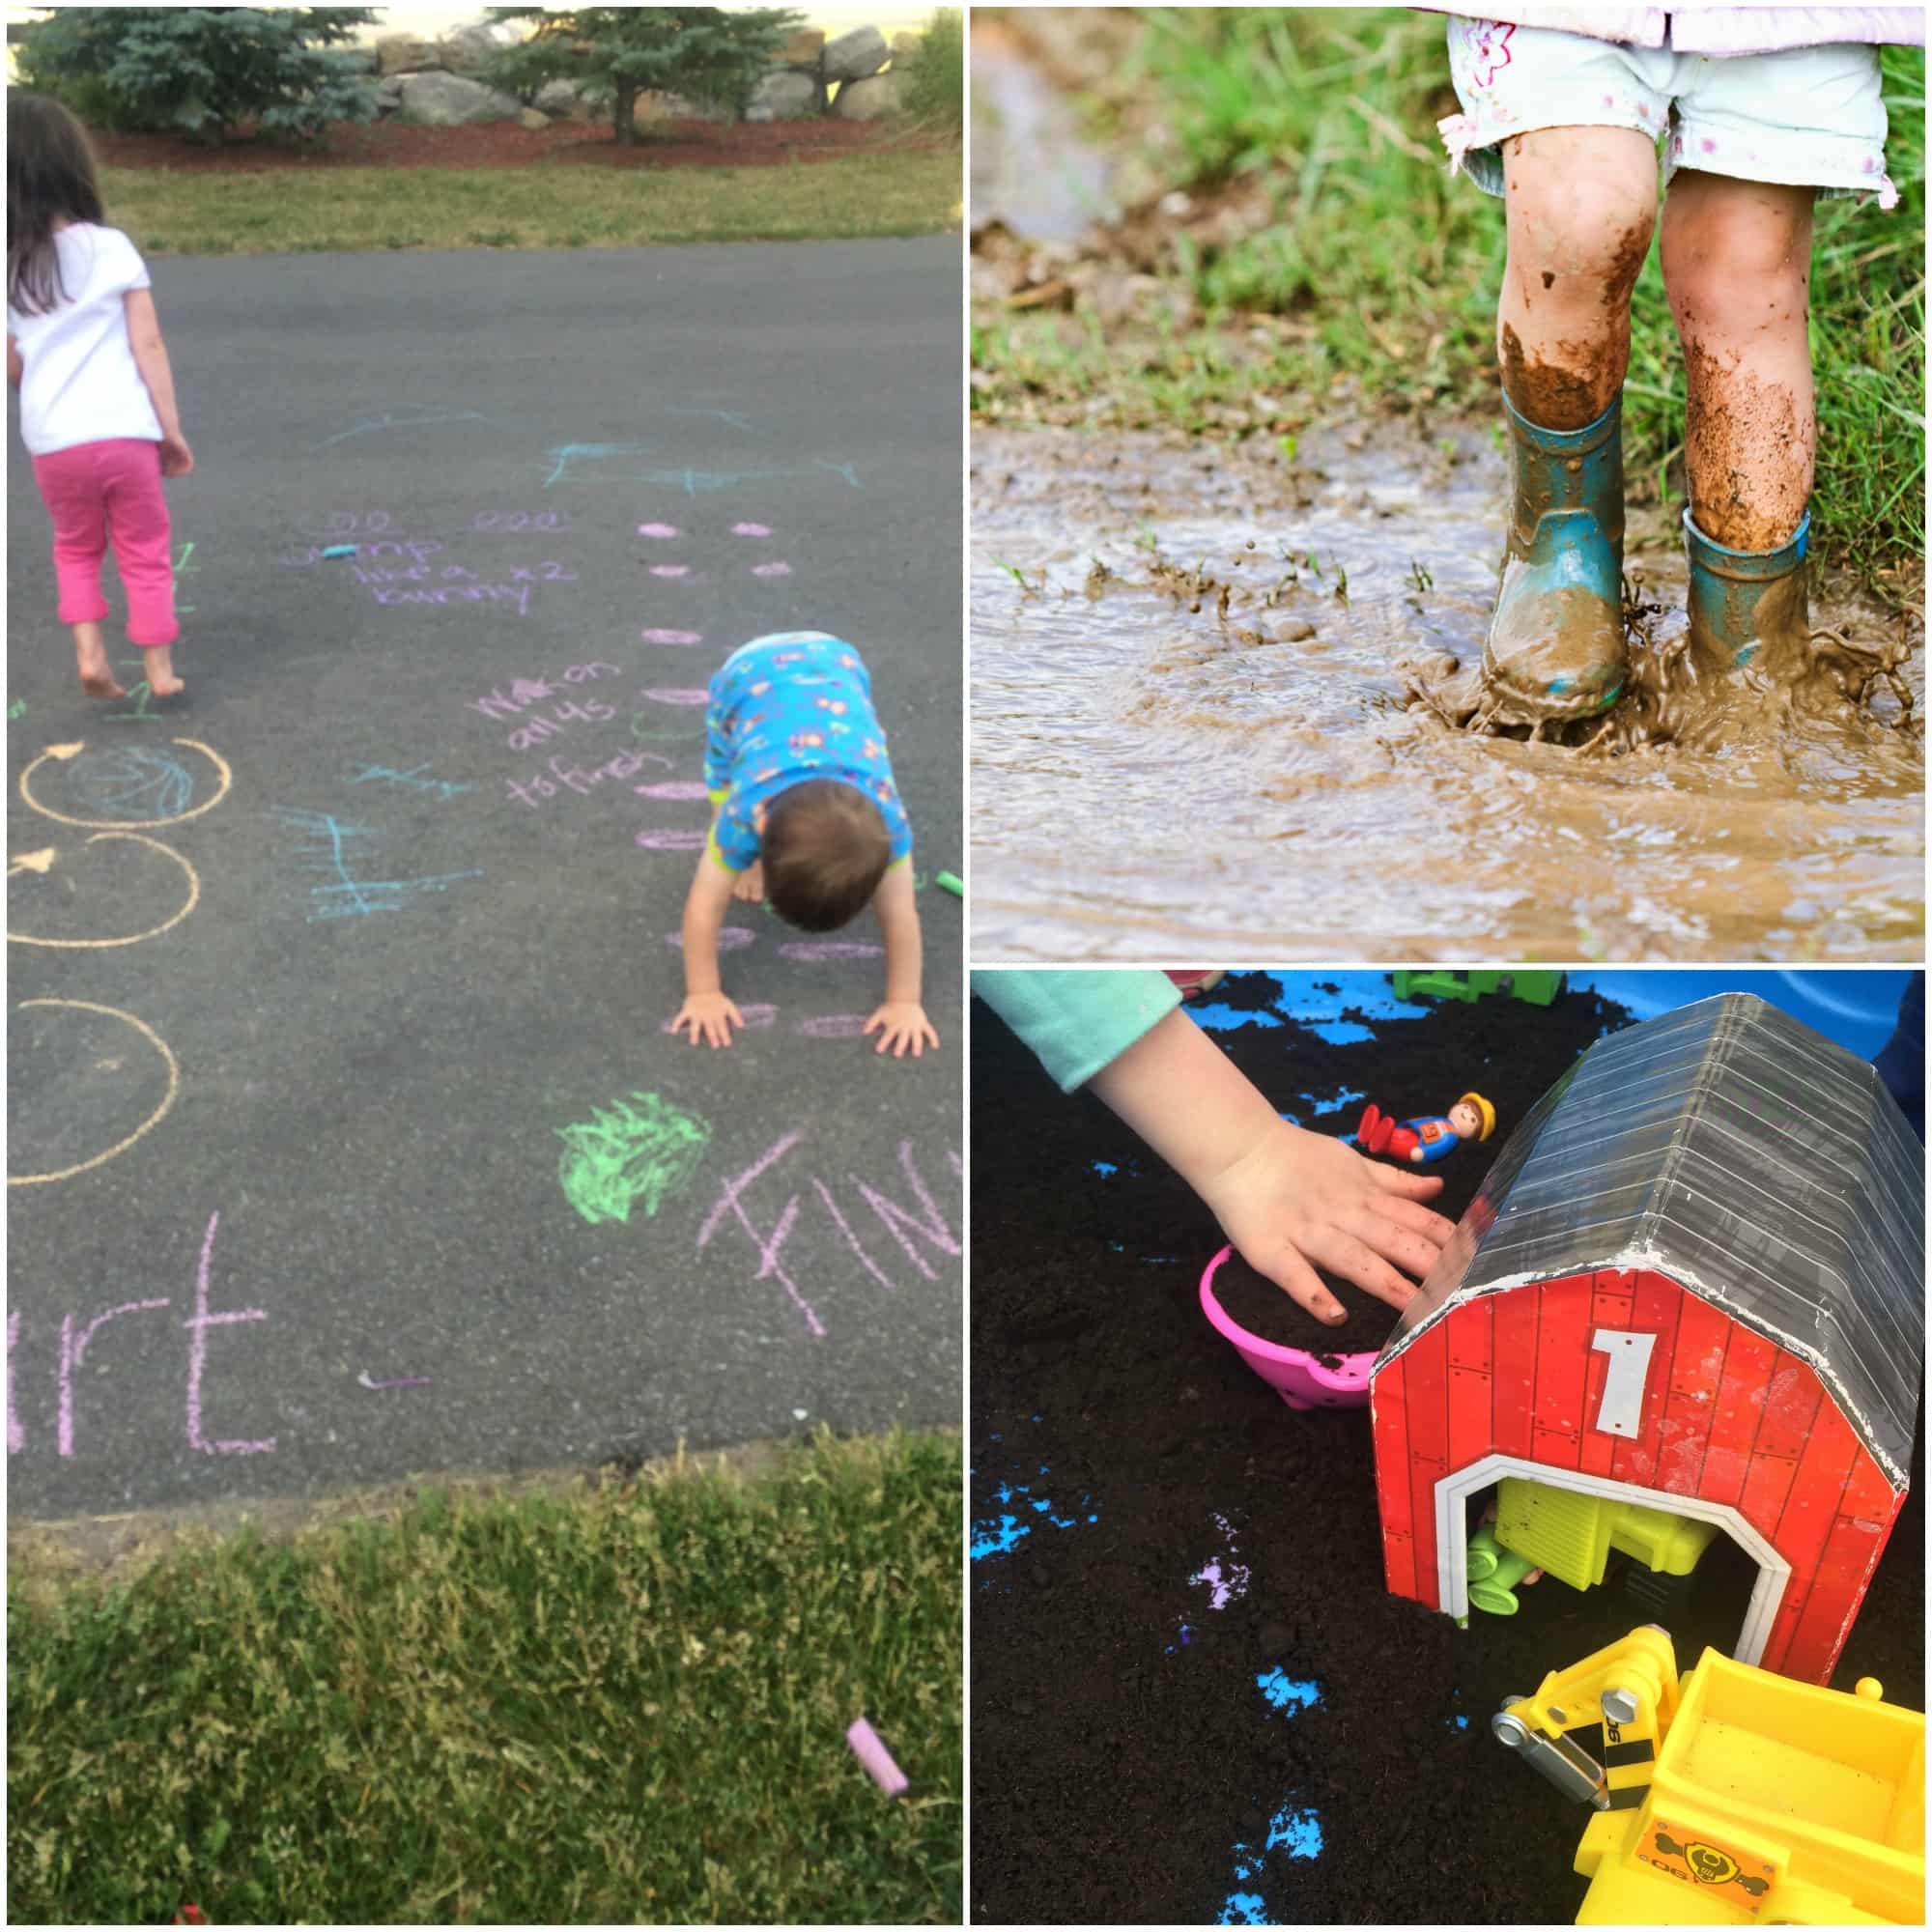 These low or no prep backyard activities use household items, are great for toddlers, preschoolers, and kindergarteners. Great for play-based learning!